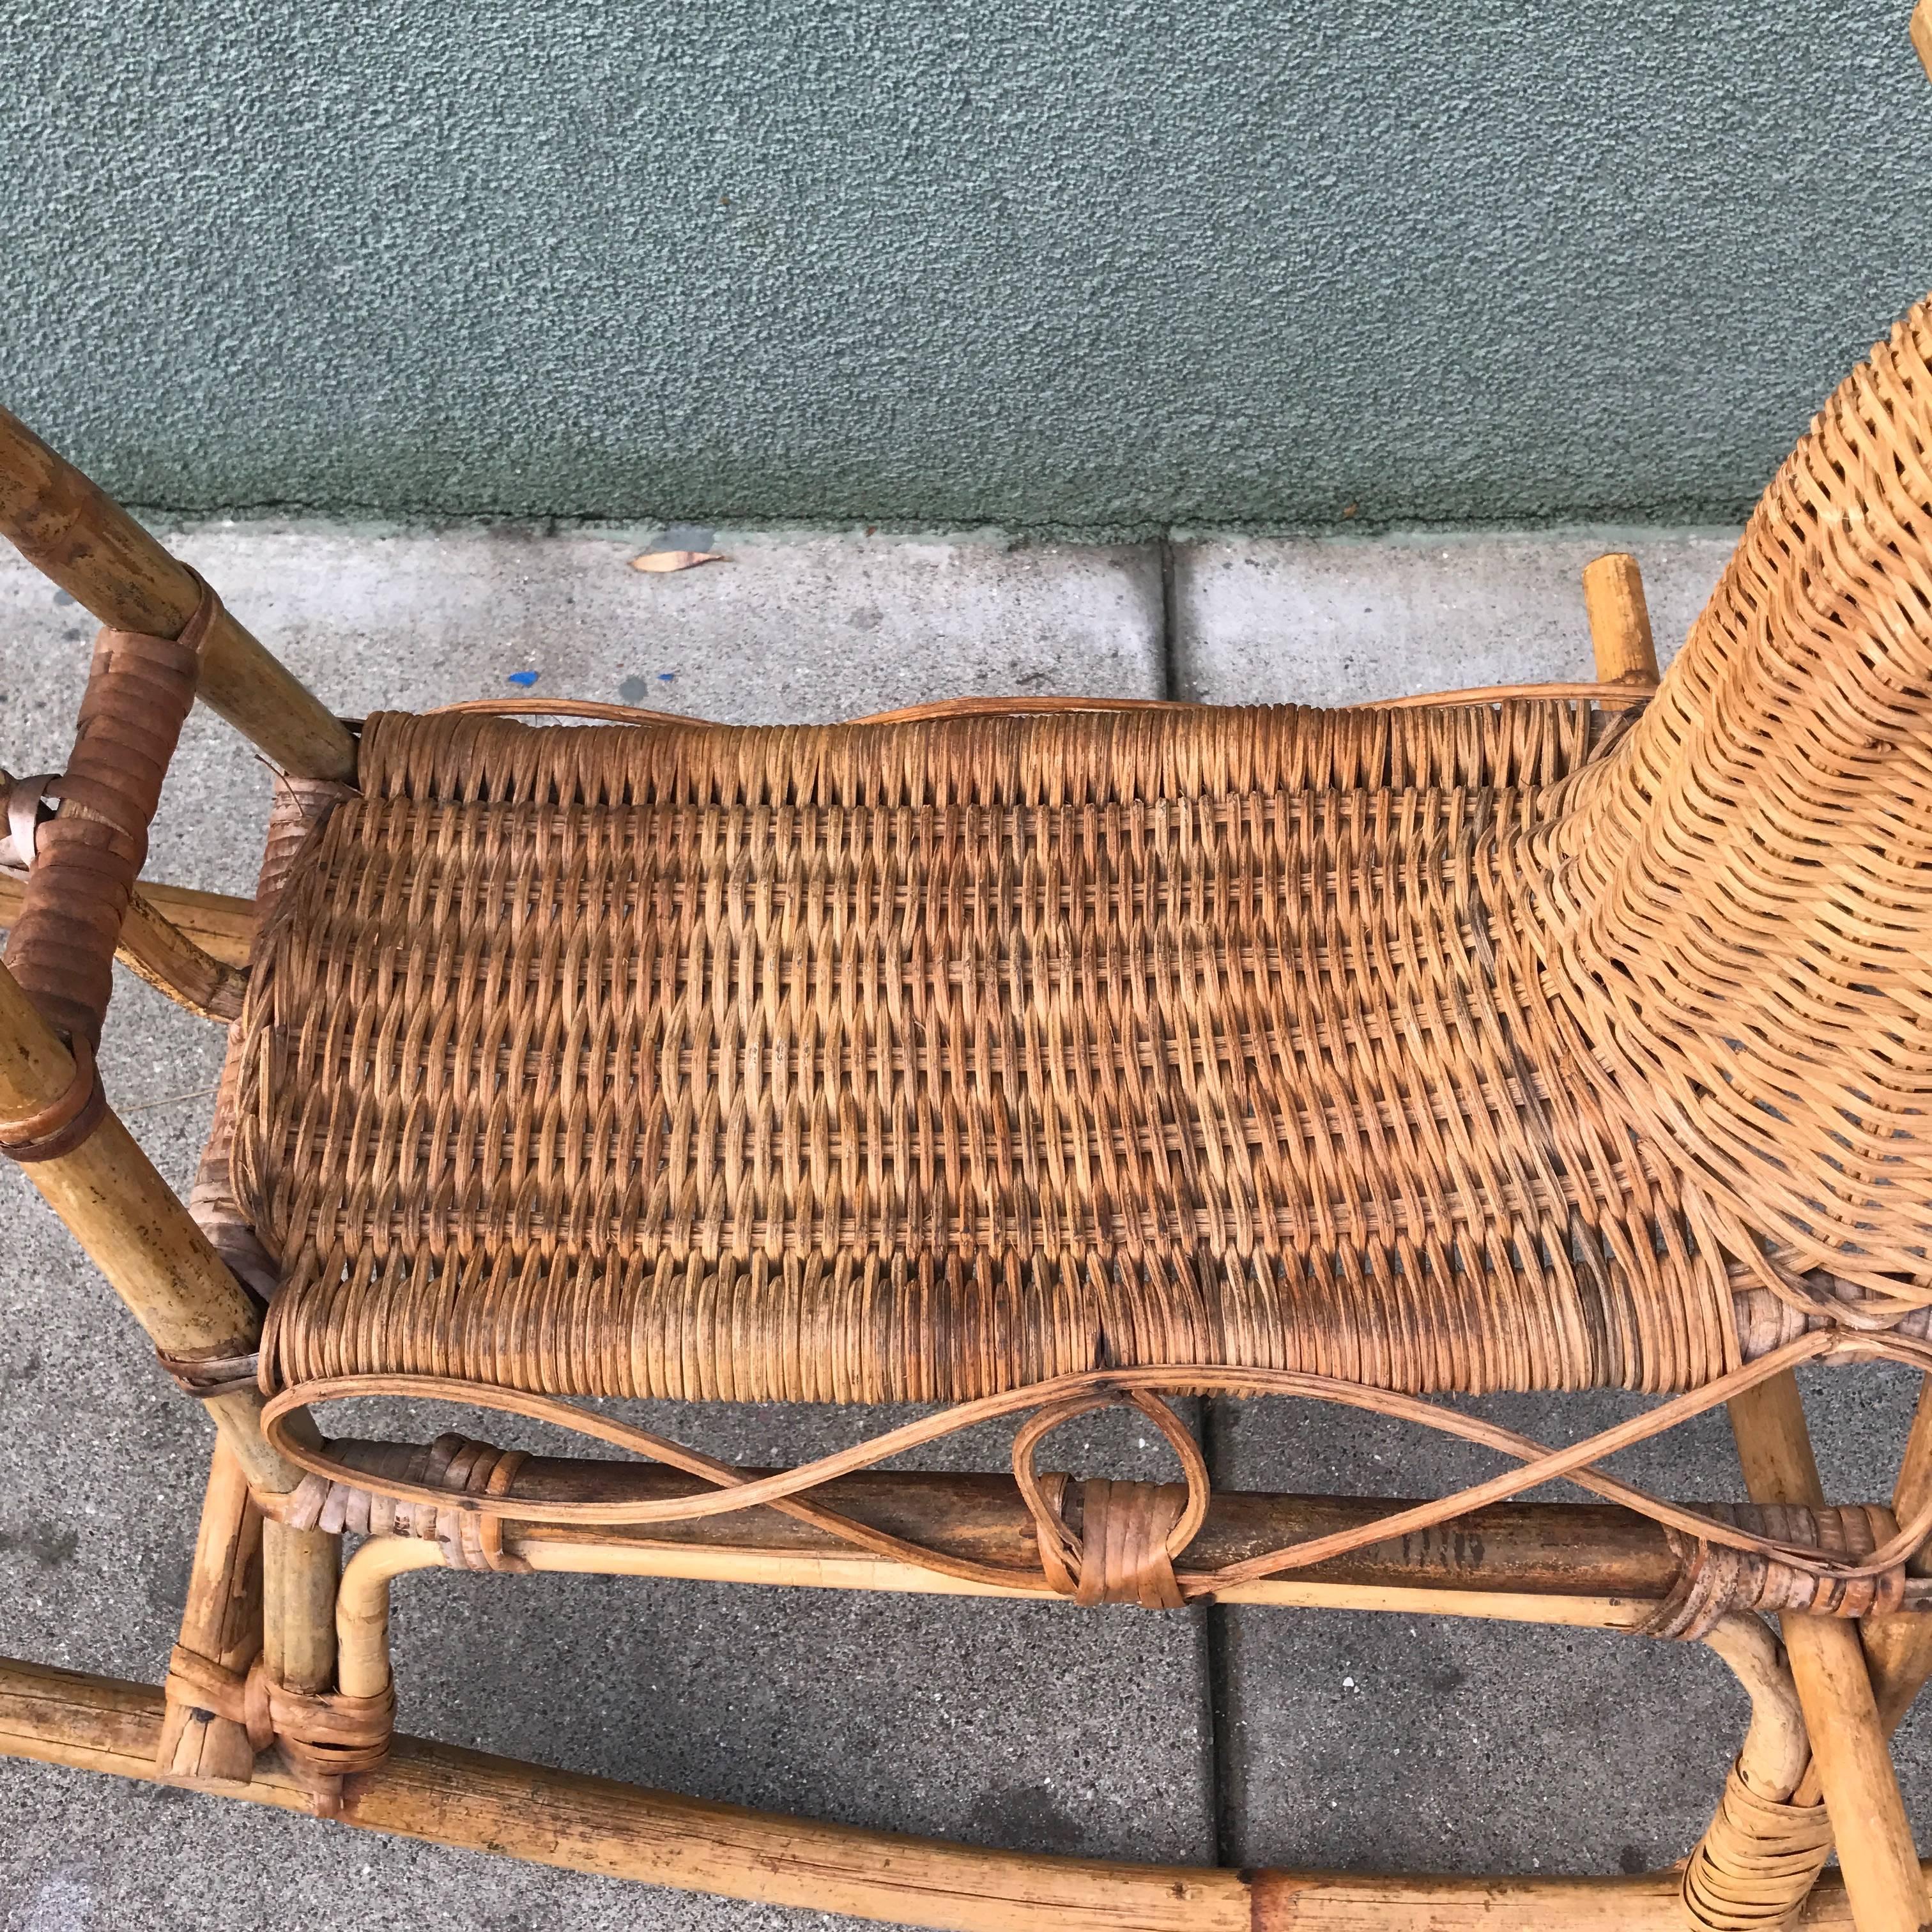 Child's woven rattan rocking horse, in excellent vintage condition with a great patina to the wicker or rattan. A nice playful sculptural abstract form for a kid's room.